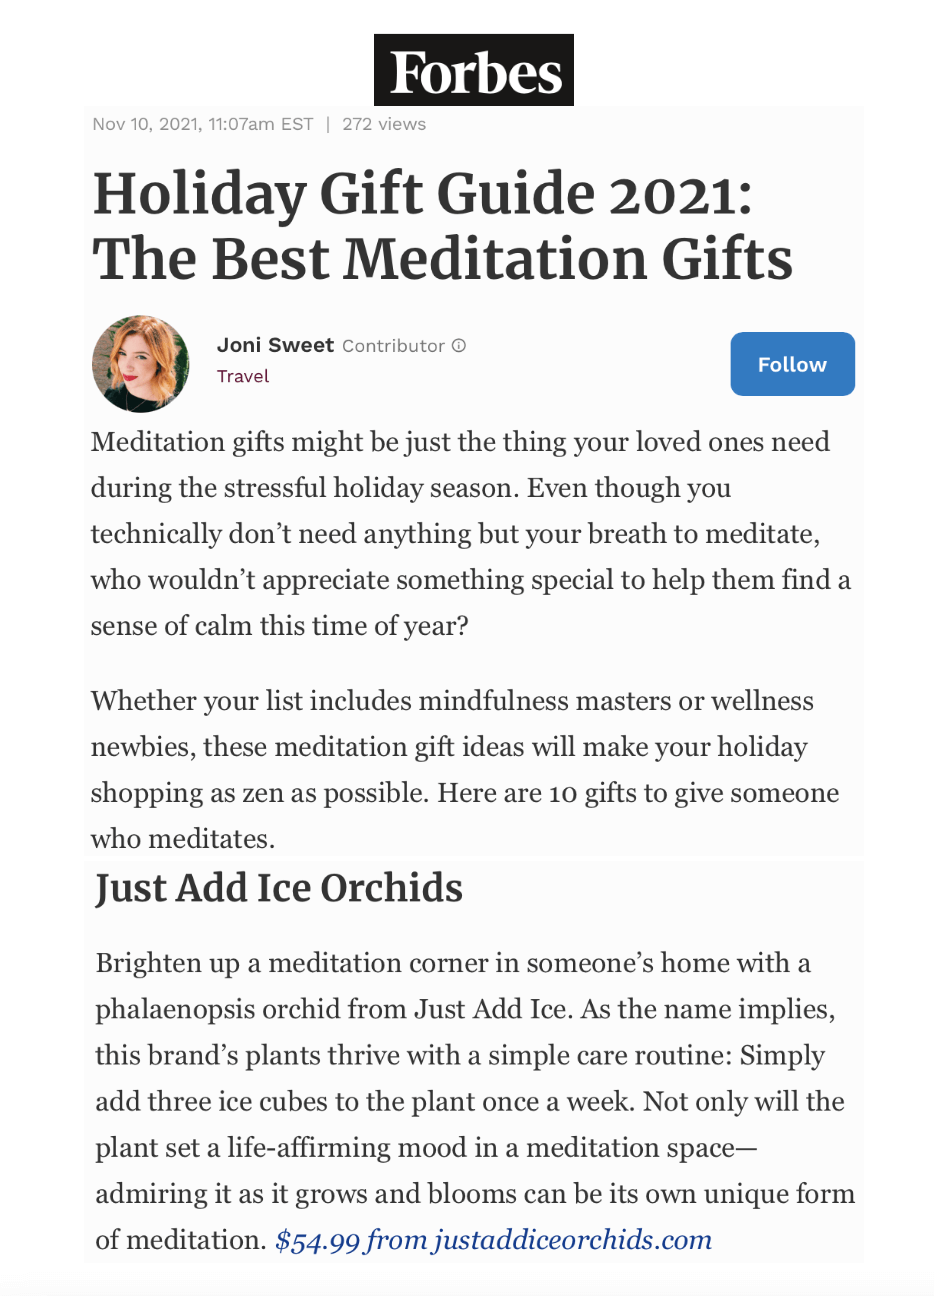 Holiday Gift Guide 2021: The Best Meditation Gifts
Featured Brands include:Just Add Ice

Read More